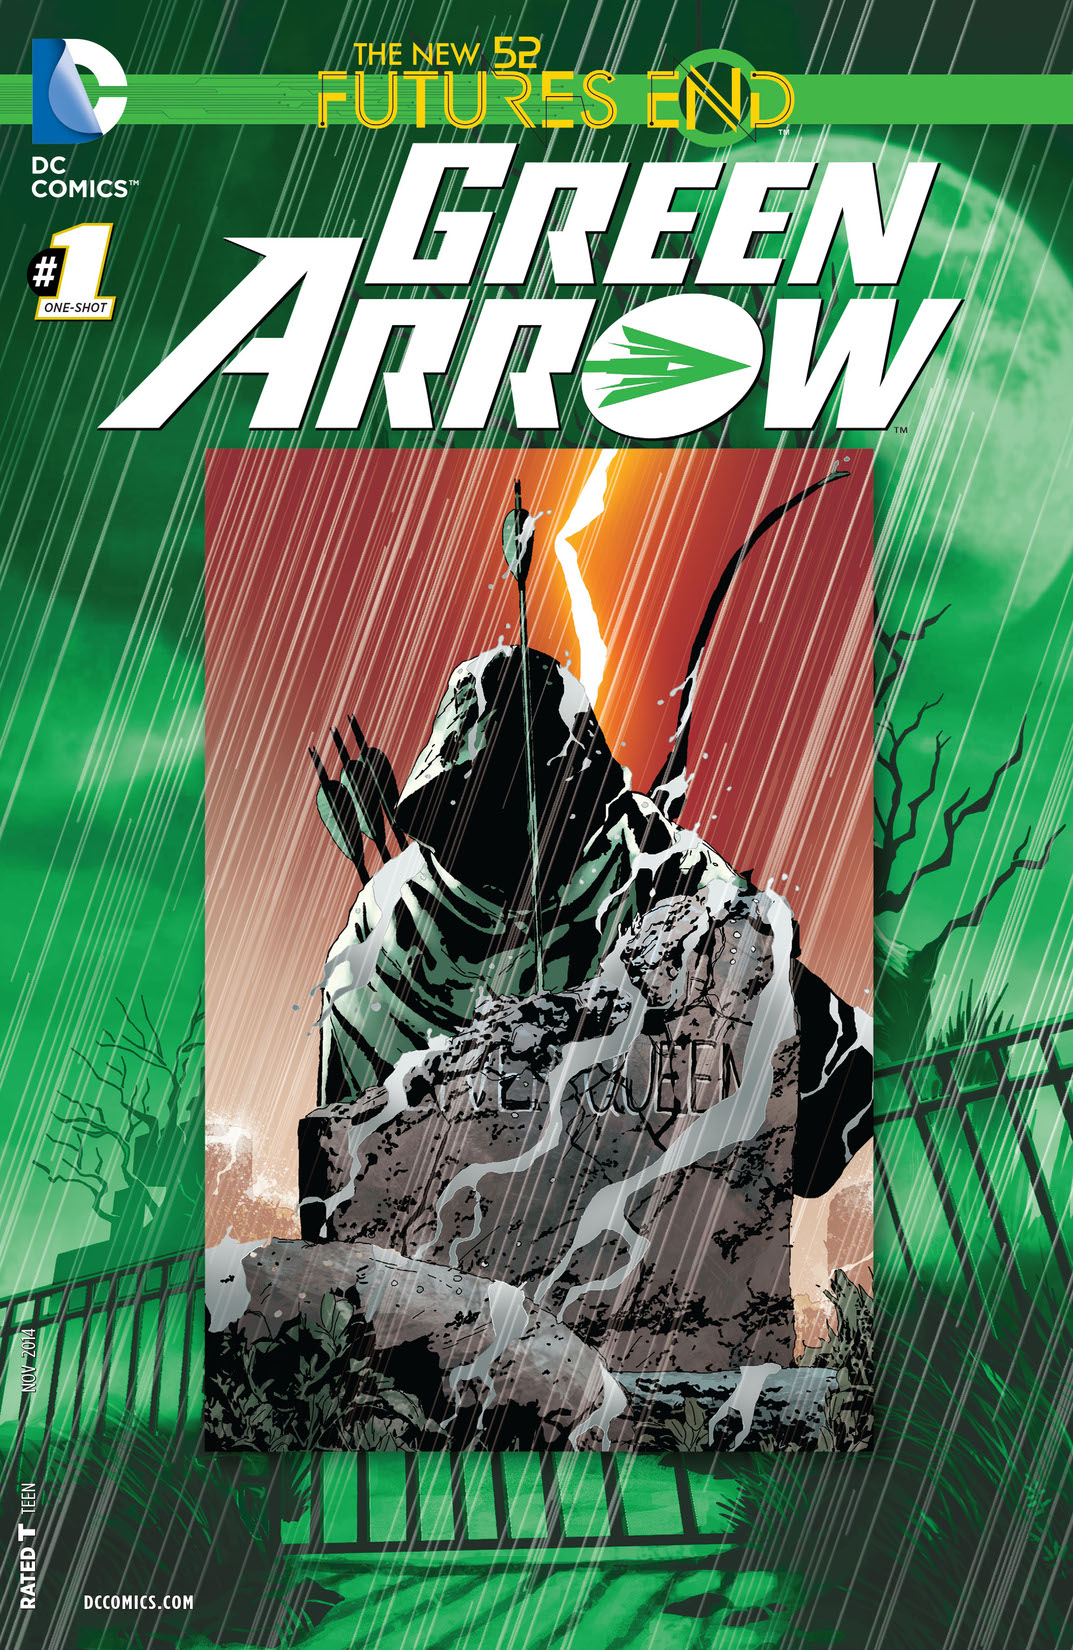 Green Arrow: Futures End (2014-) #1 preview images